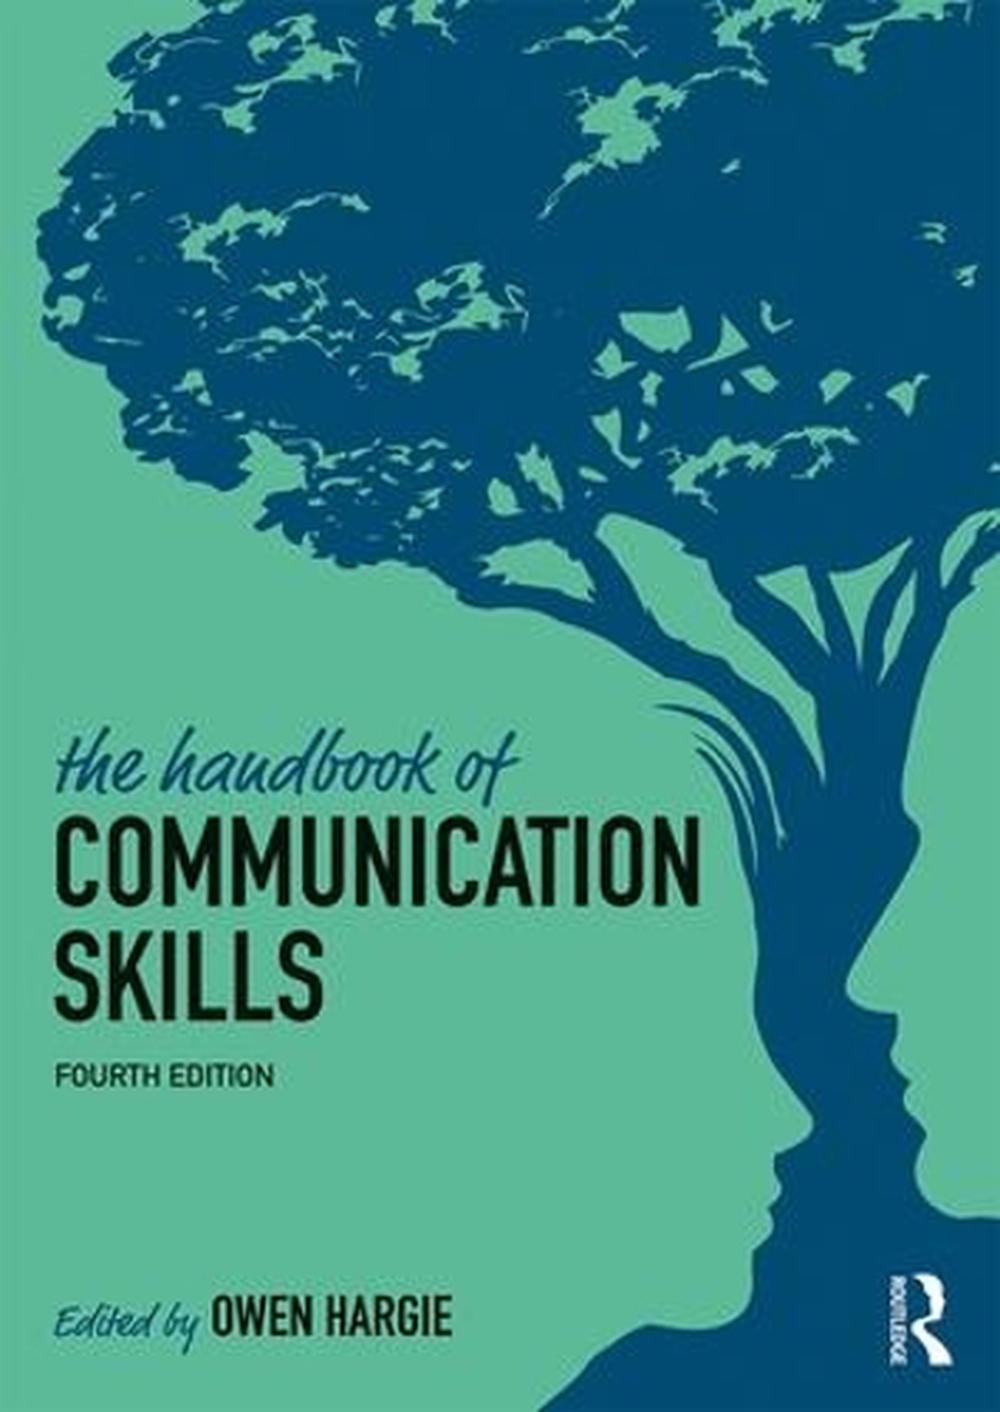 book review on communication